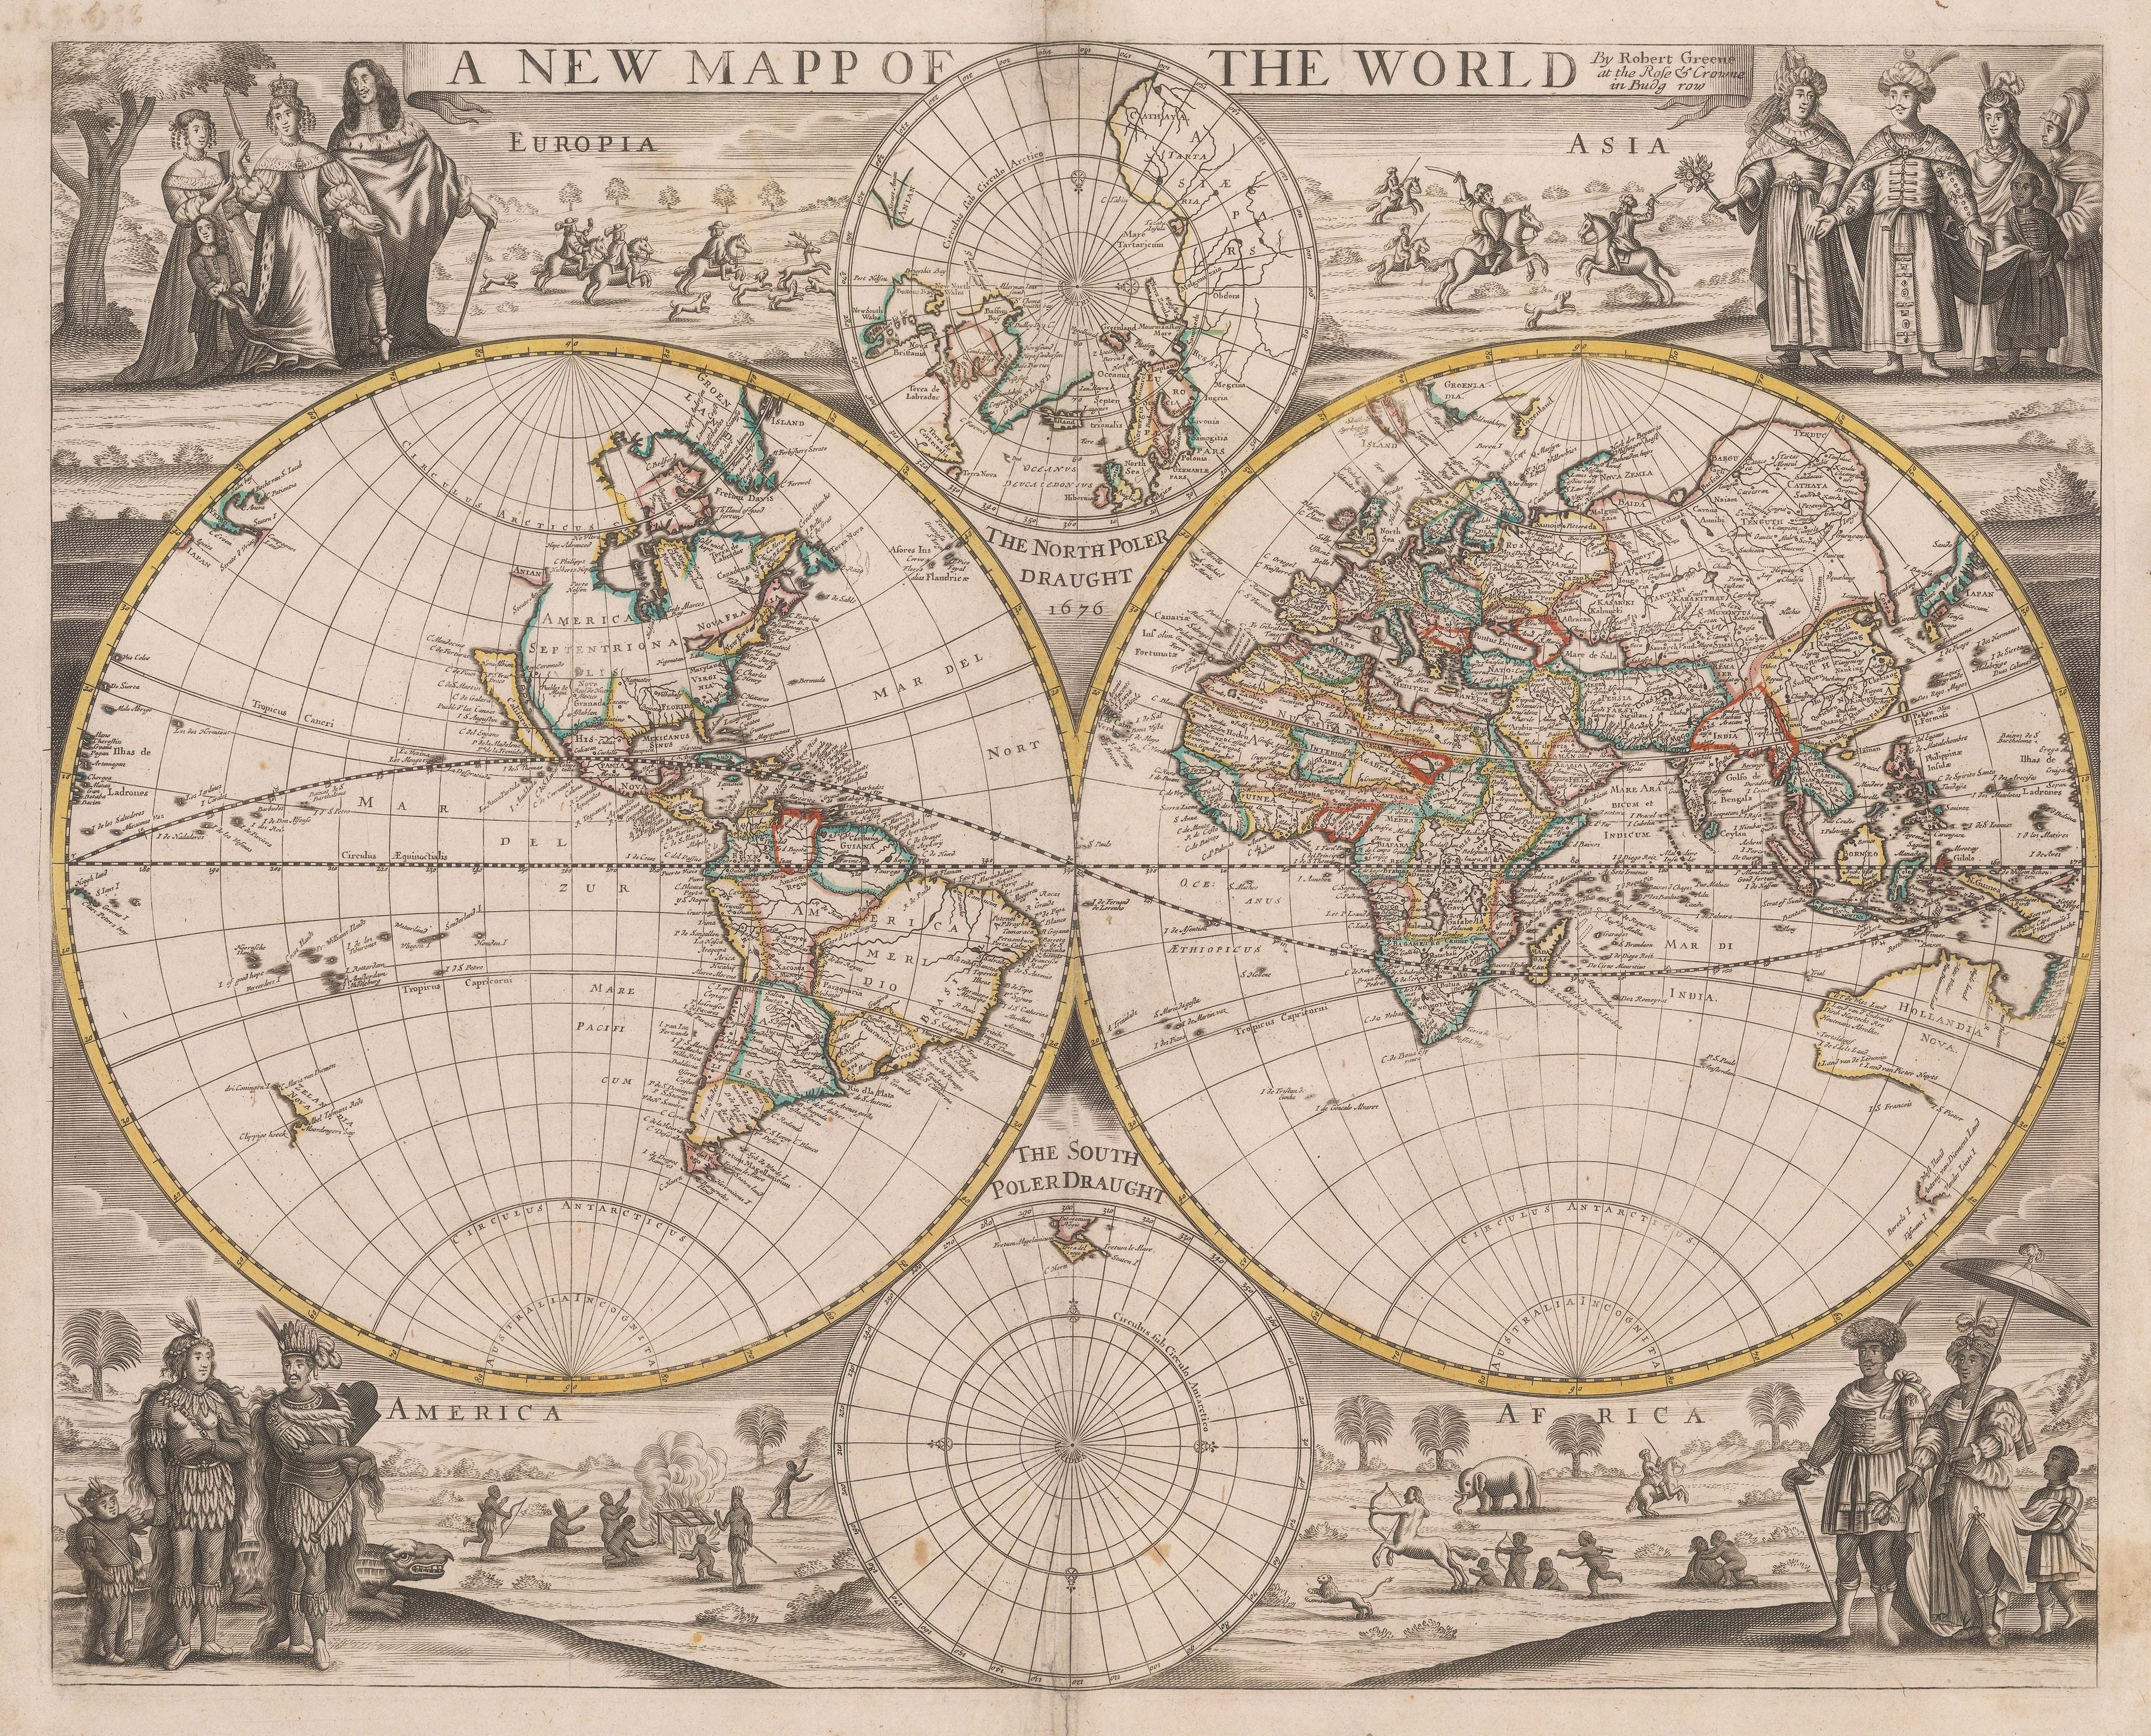 Robert Greene's 'A New Map of the World', double-hemisphere world map, largely in black and white with some added colour by hand.